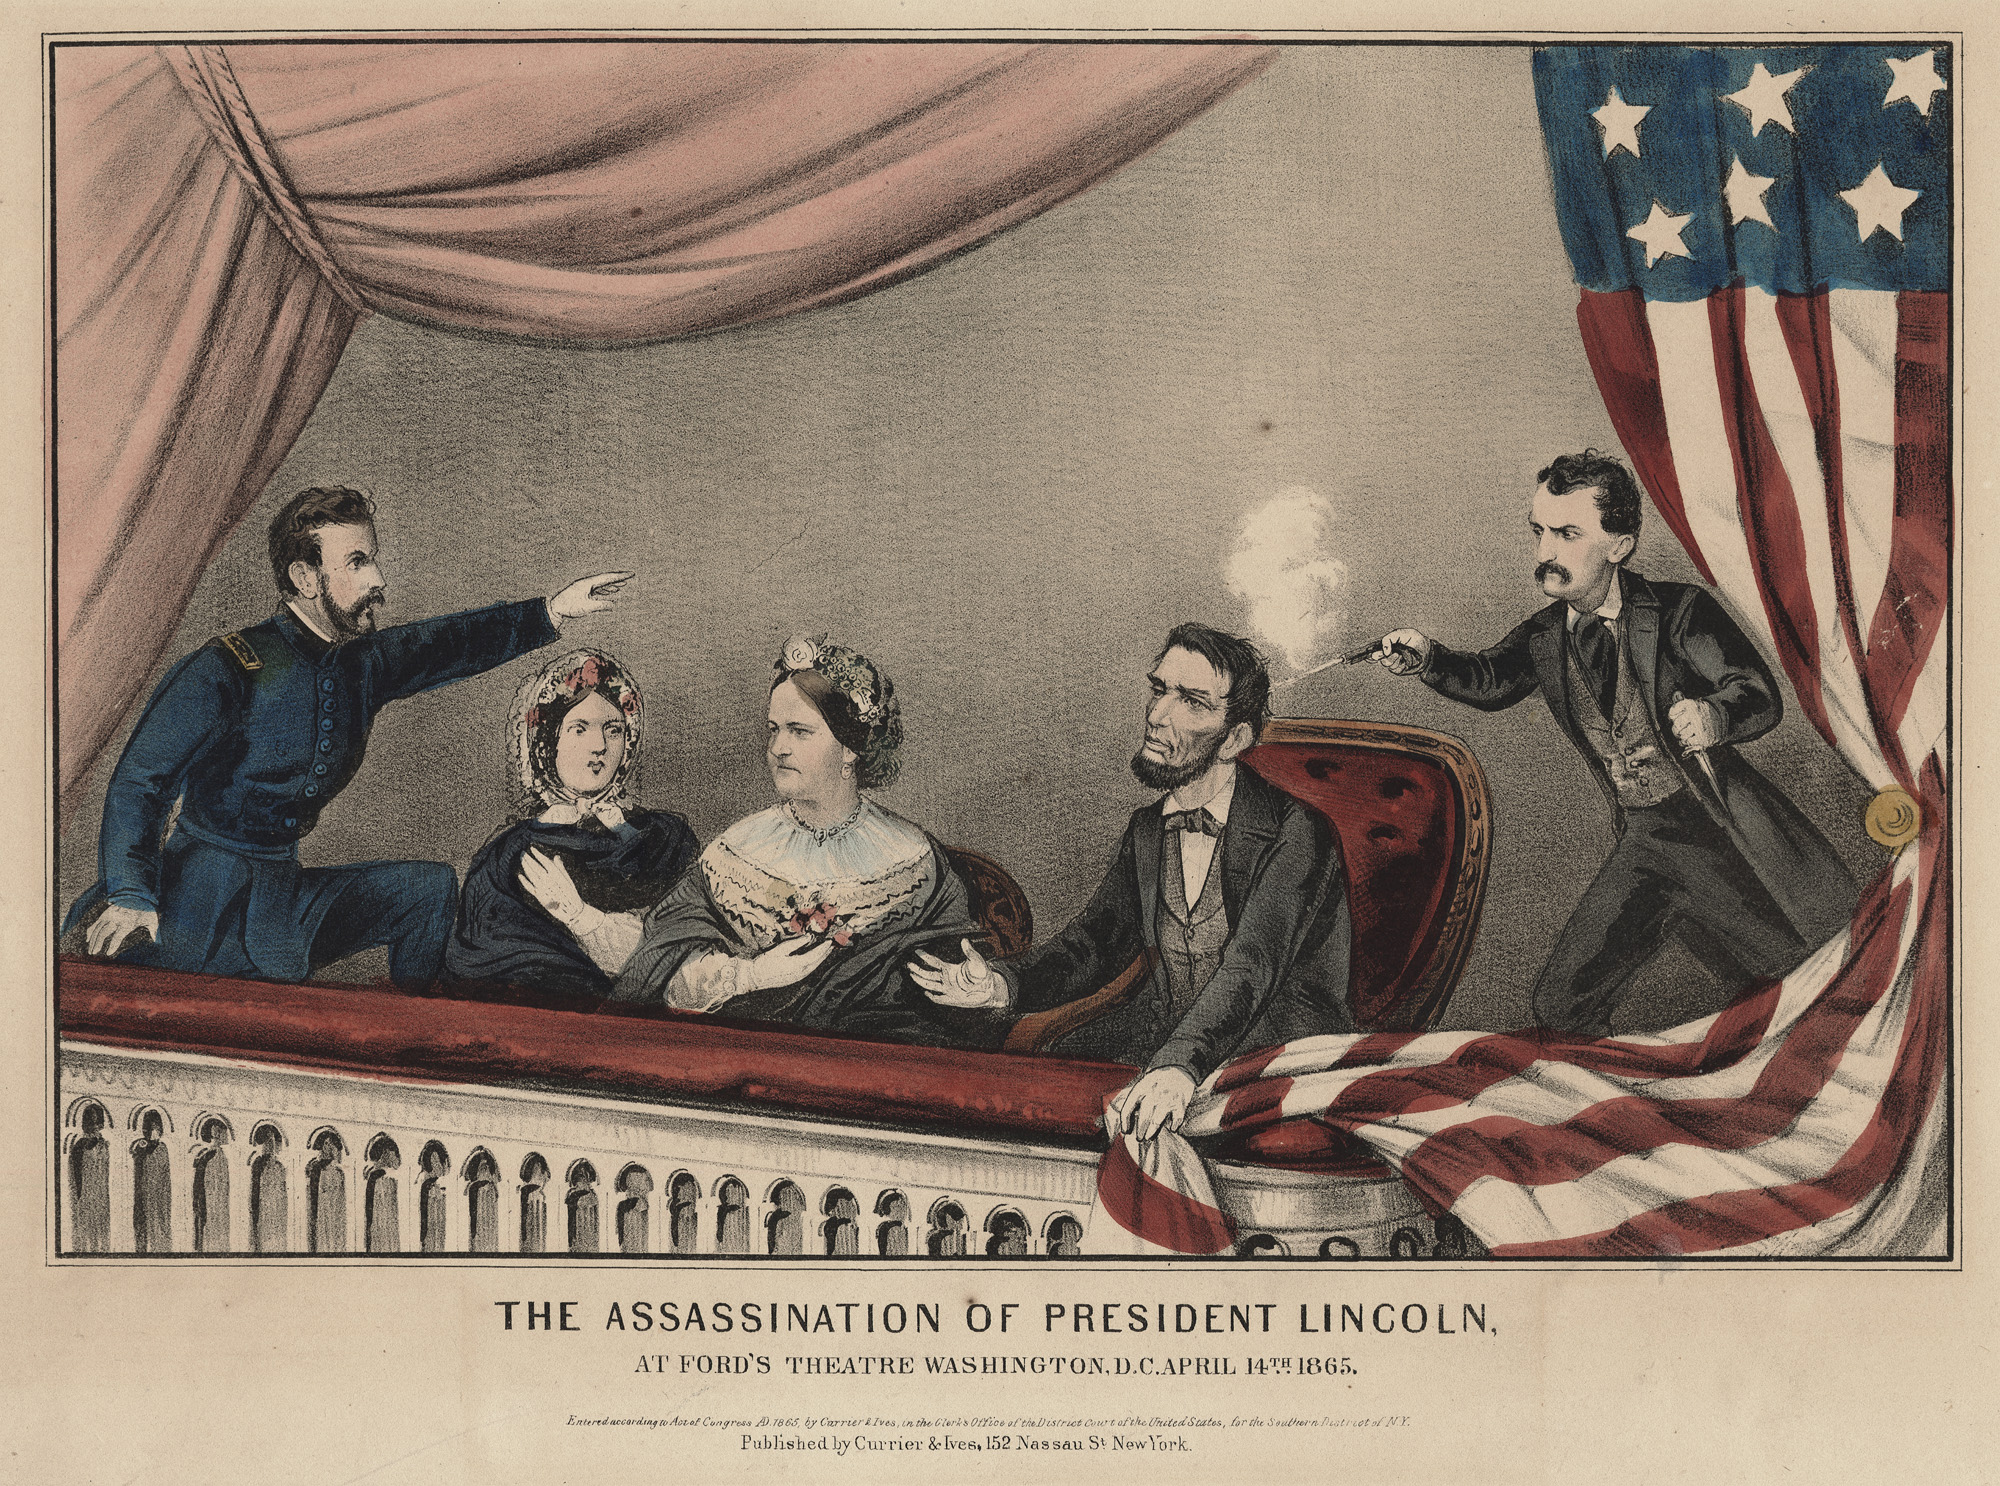 Nathaniel Currier and James Merritt Ives, <em>The Assassination of President Lincoln</em>, 1865, lithograph, 14 x 17 inches (Chicago History Museum)